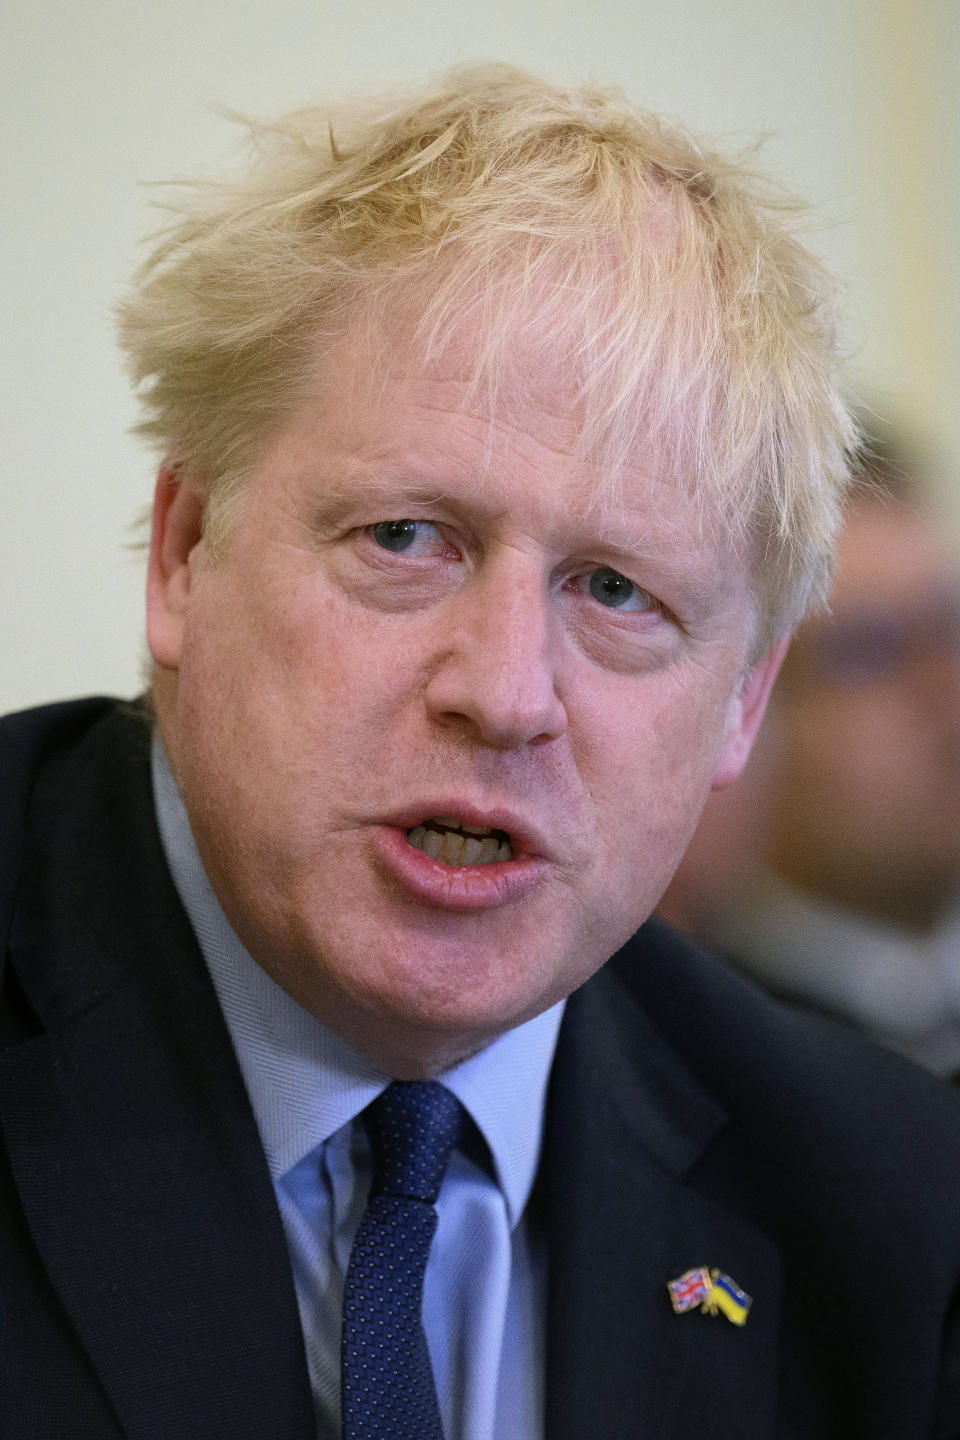 Britain's Prime Minister Boris Johnson addresses his Cabinet during his weekly Cabinet meeting in Downing Street on Tuesday, June 7, 2022 in London. Johnson was meeting his Cabinet and trying to patch up his tattered authority on Tuesday after surviving a no-confidence vote that has left him a severely weakened leader. (Leon Neal/Pool Photo via AP)